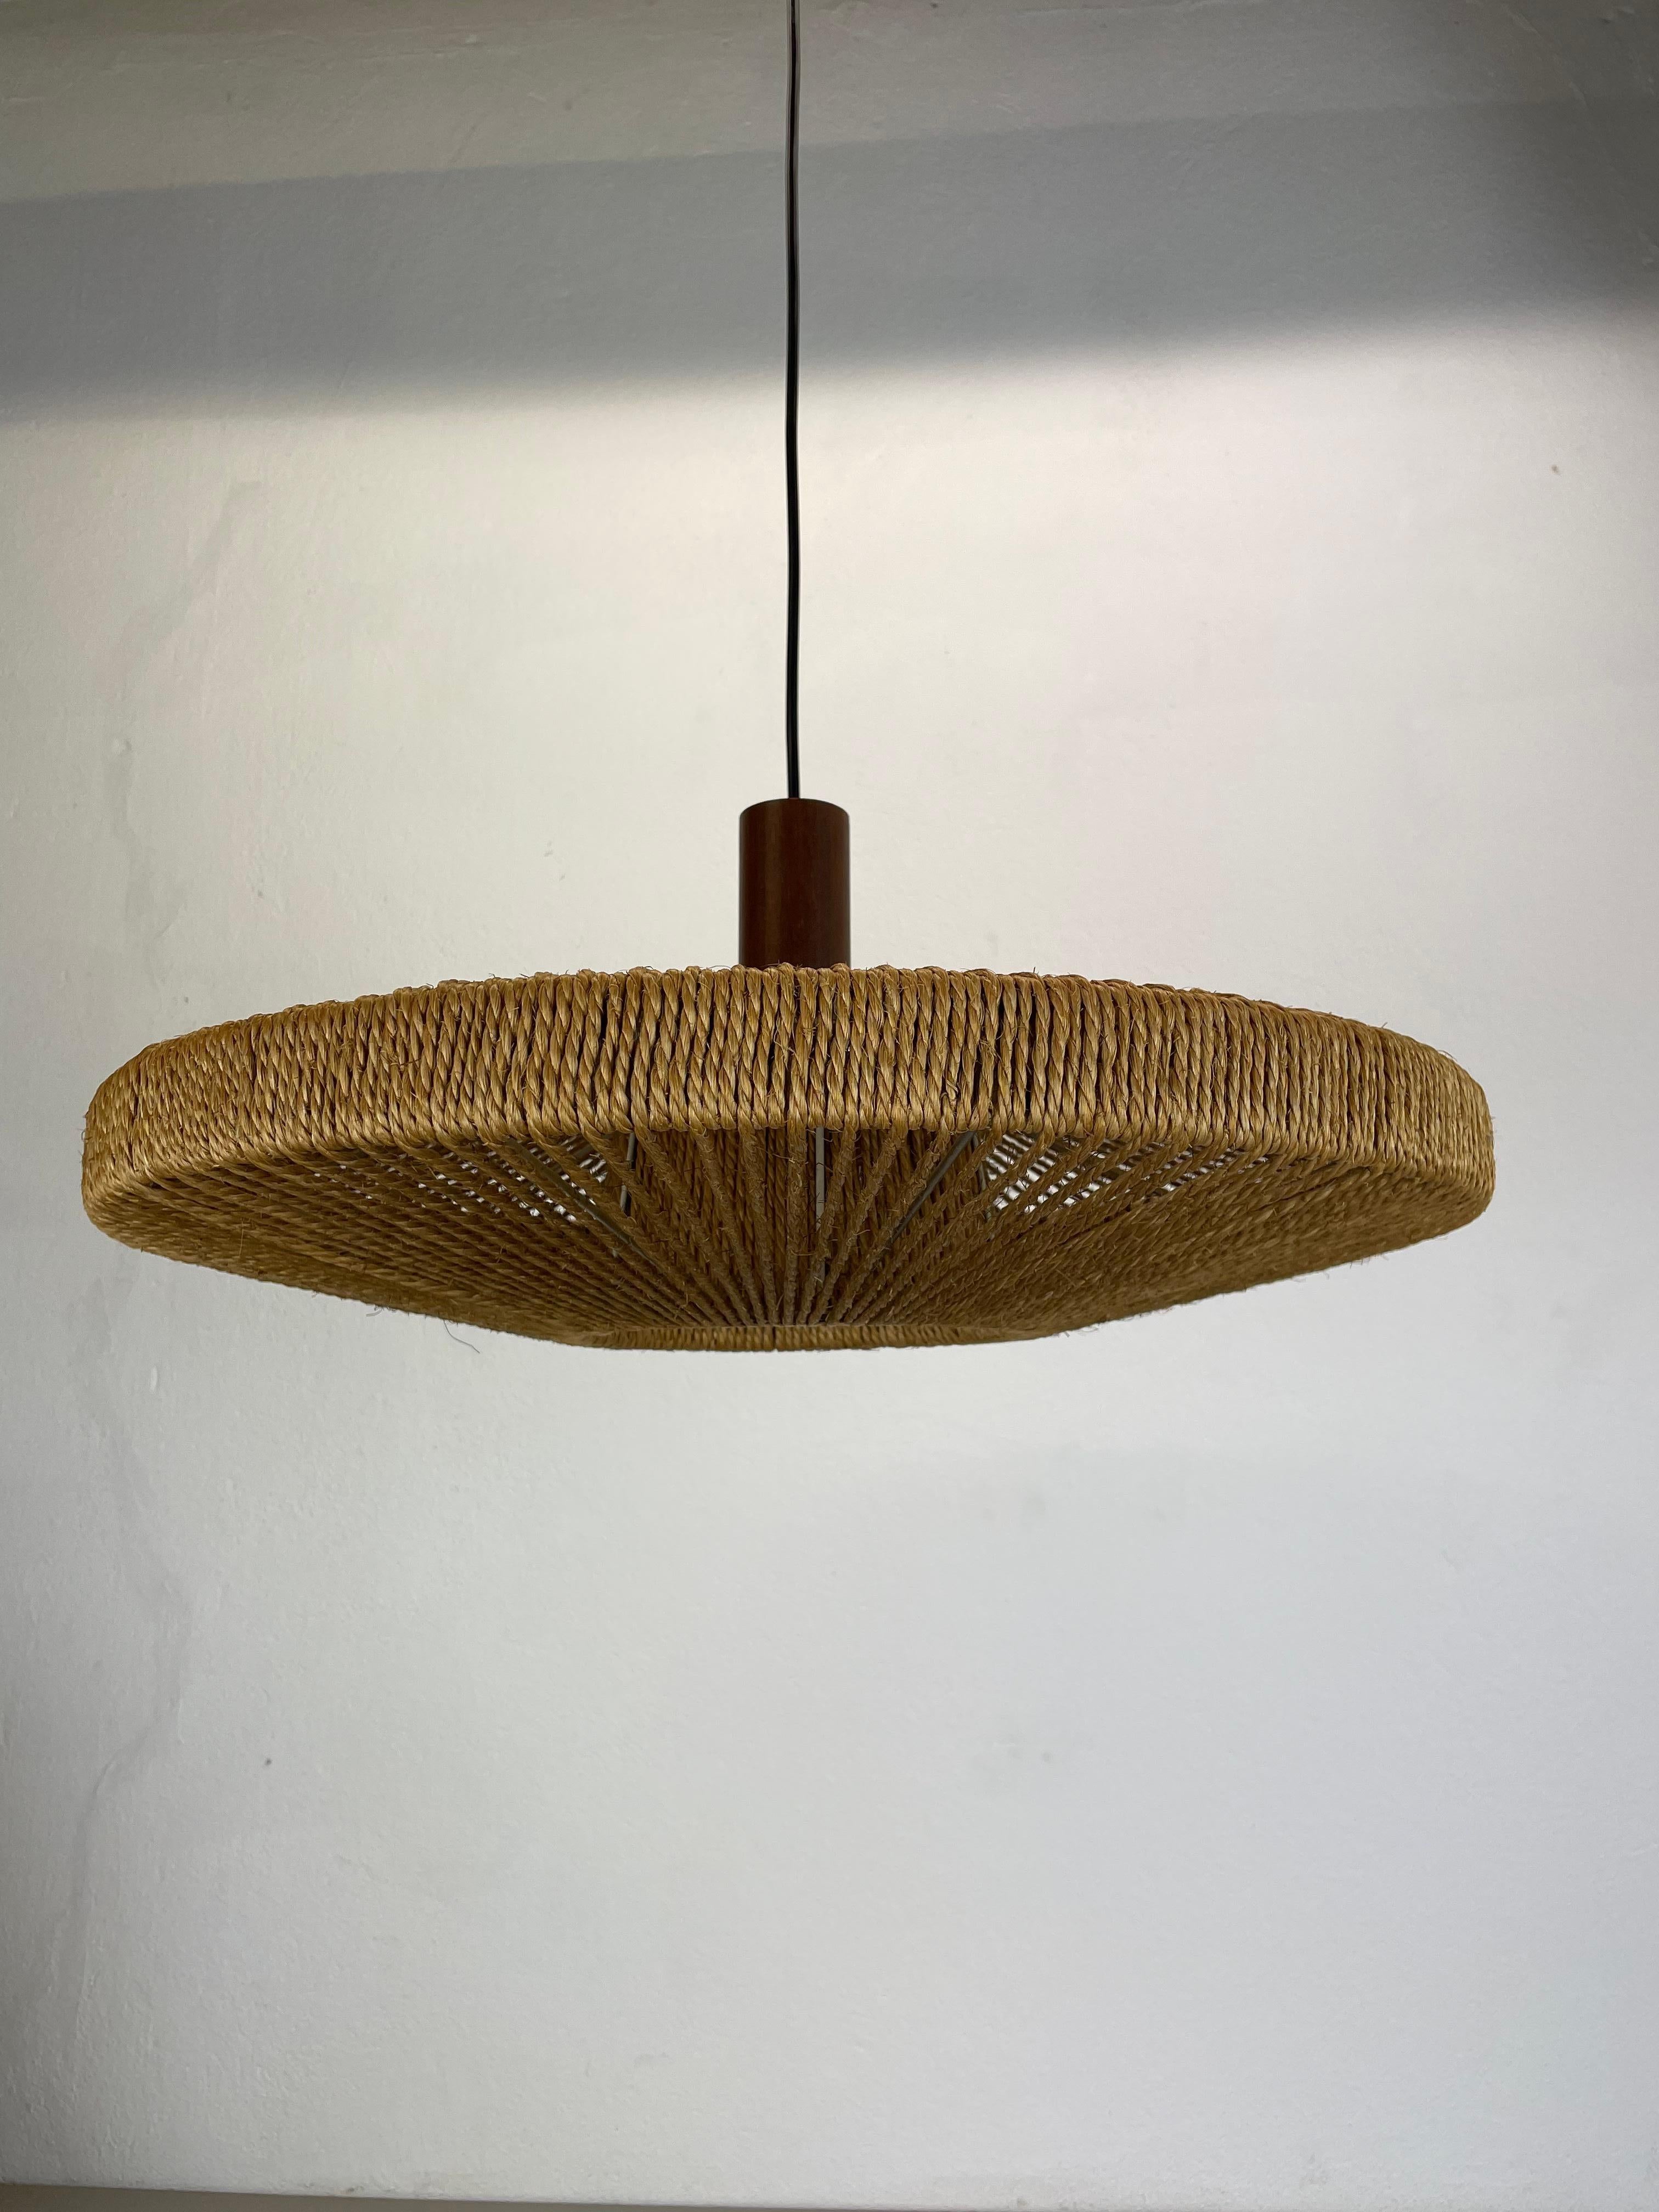 56cm Organic Sisal and Teak Ufo Hanging Light Made by Temde Lights Germany 1960s For Sale 1